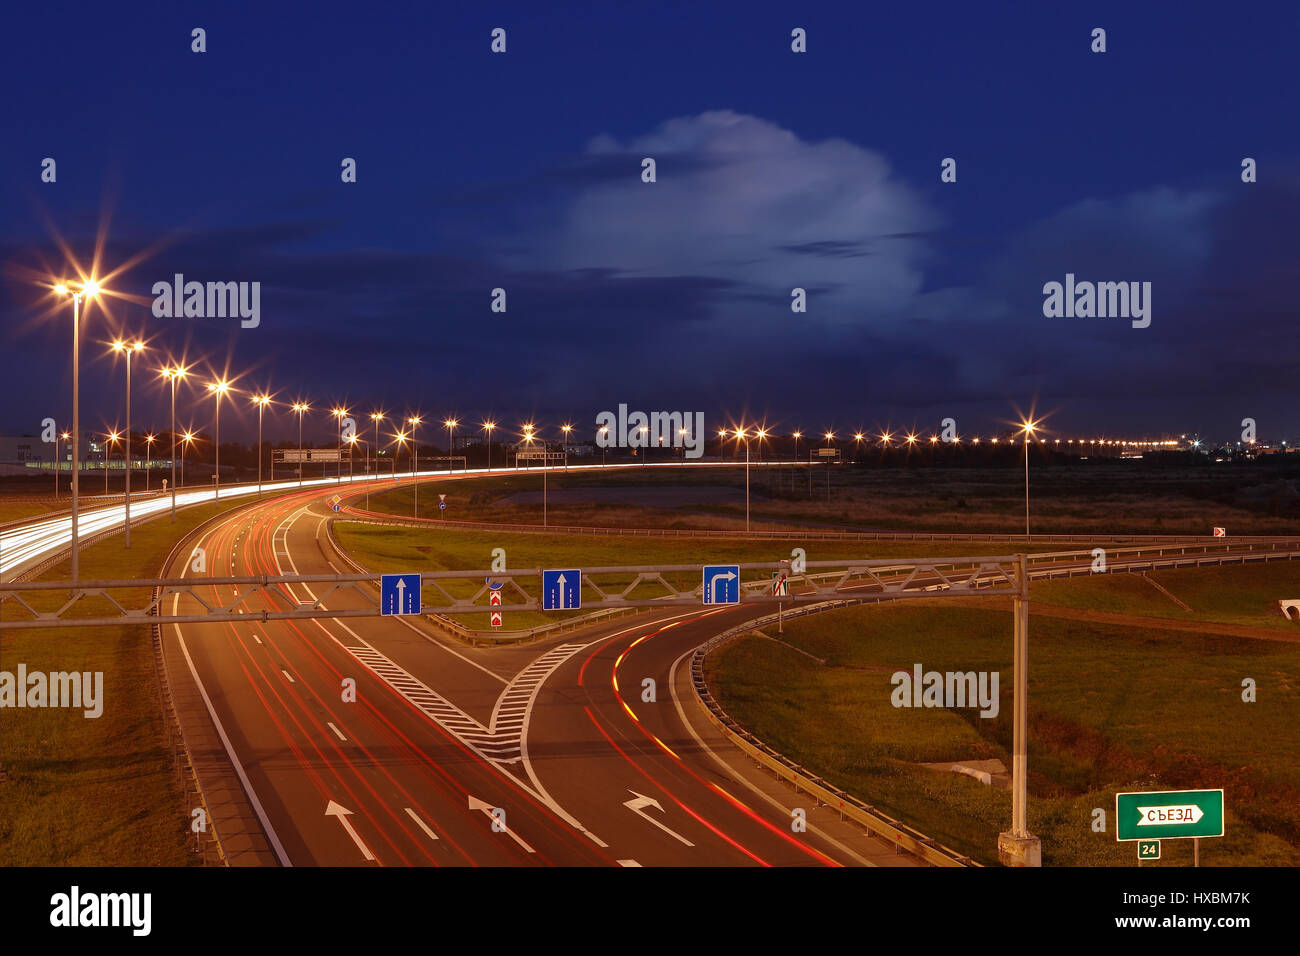 ST-PETERSBURG, RUSSIA - SEPTEMBER 17: Ringway St Petersburg, September 17, 2009. The mast lighting on the night road. Electric lights in the night hig Stock Photo